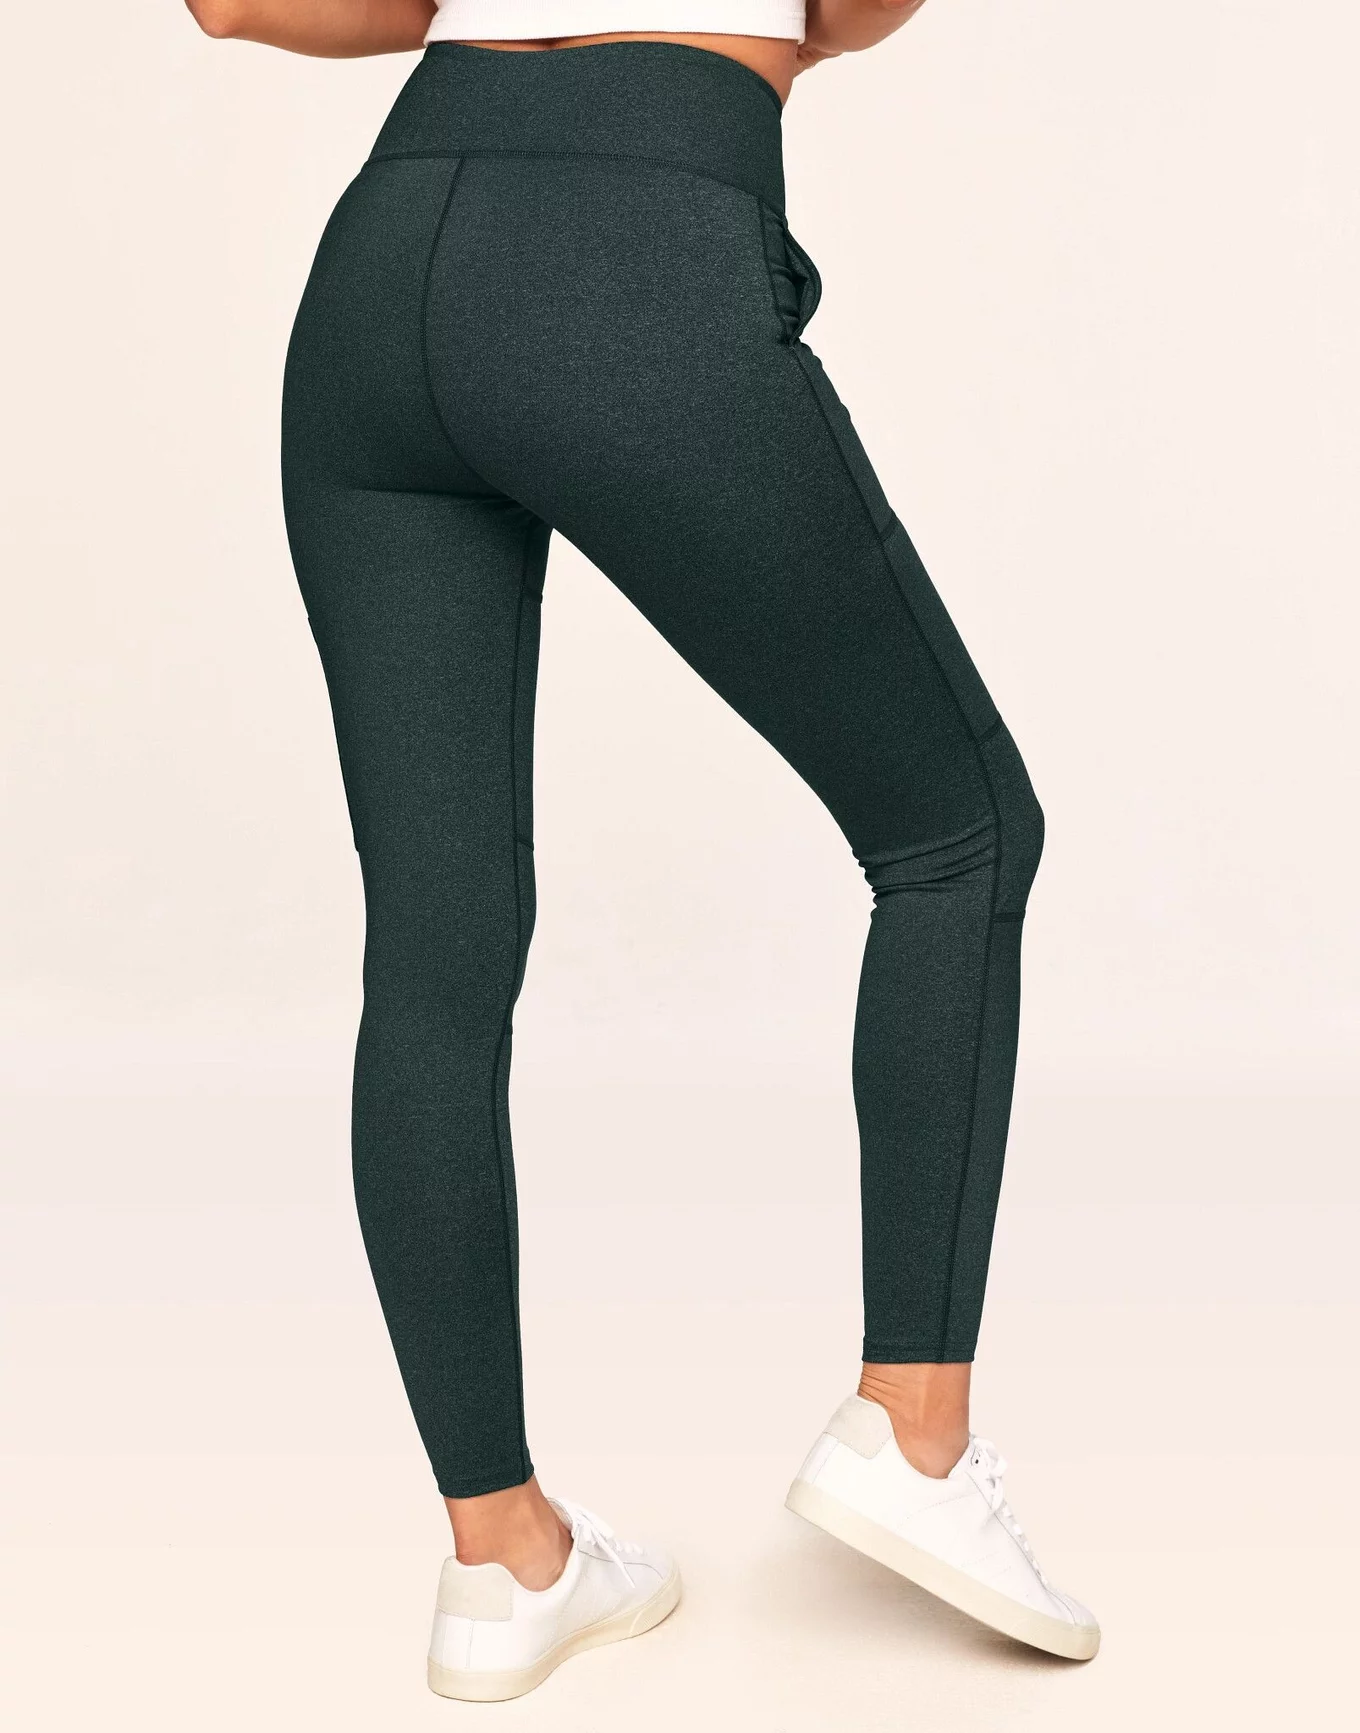 High-Rise Side-Stripe 7/8-Length Compression Leggings for Women #compression#Breathable#holds